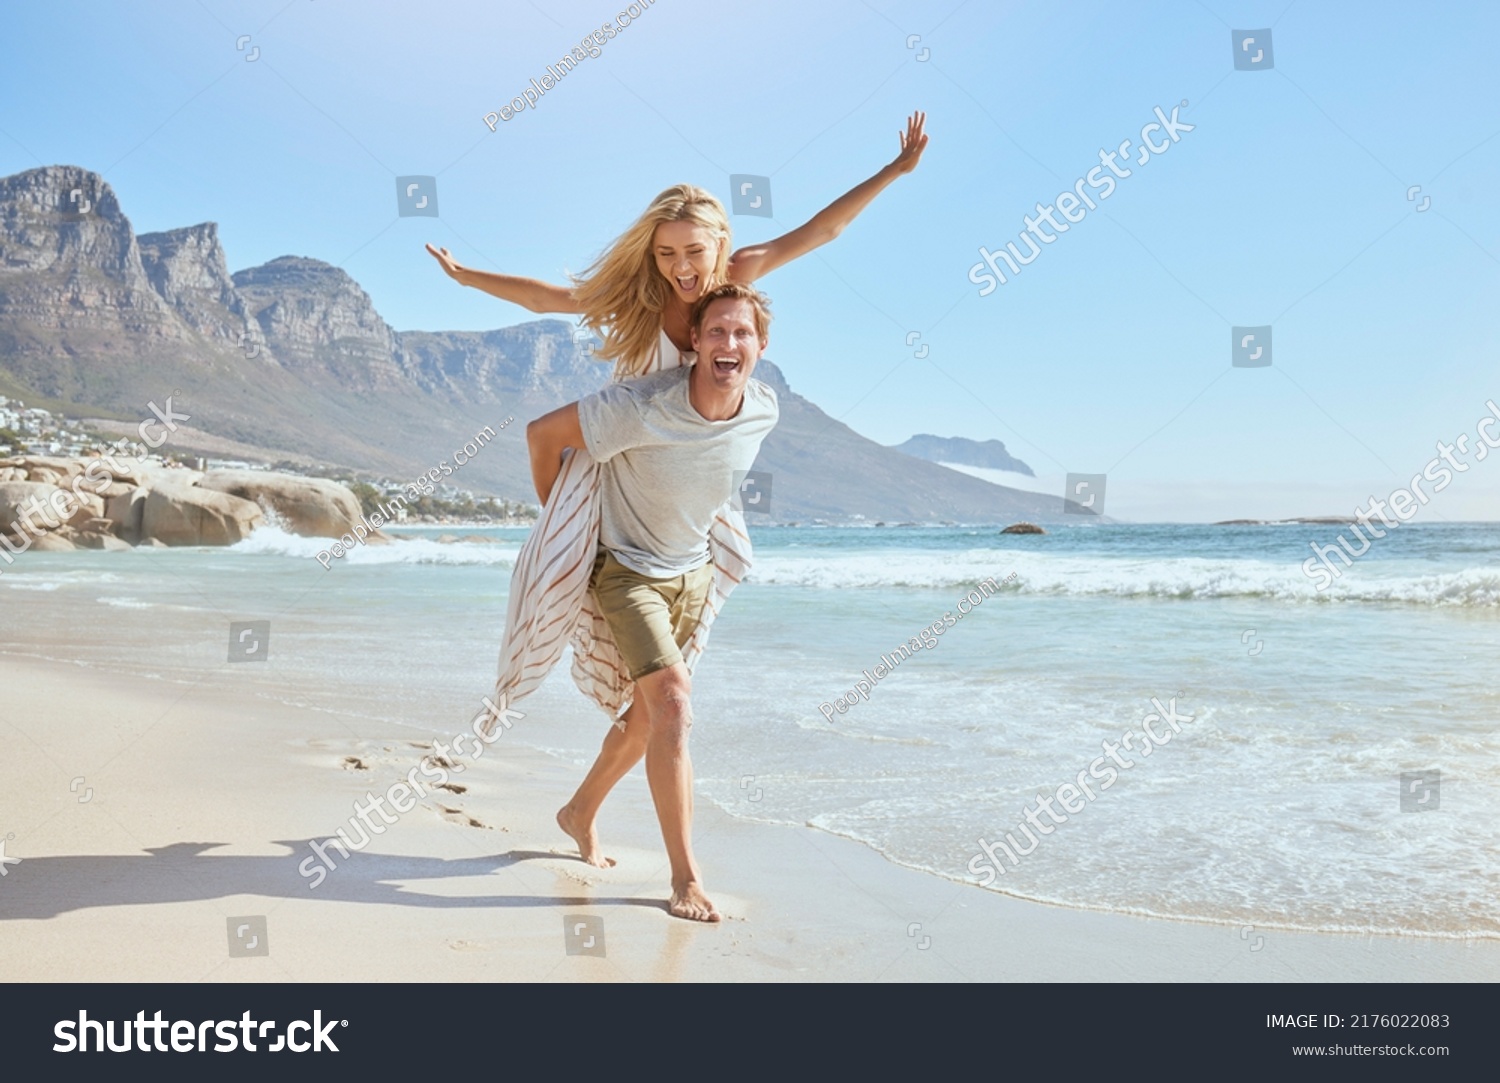 Portrait of a happy and loving young couple enjoying a day at beach in summer. Cheerful affectionate husband giving his joyful wife a piggyback while walking and having fun by the seashore on holiday #2176022083